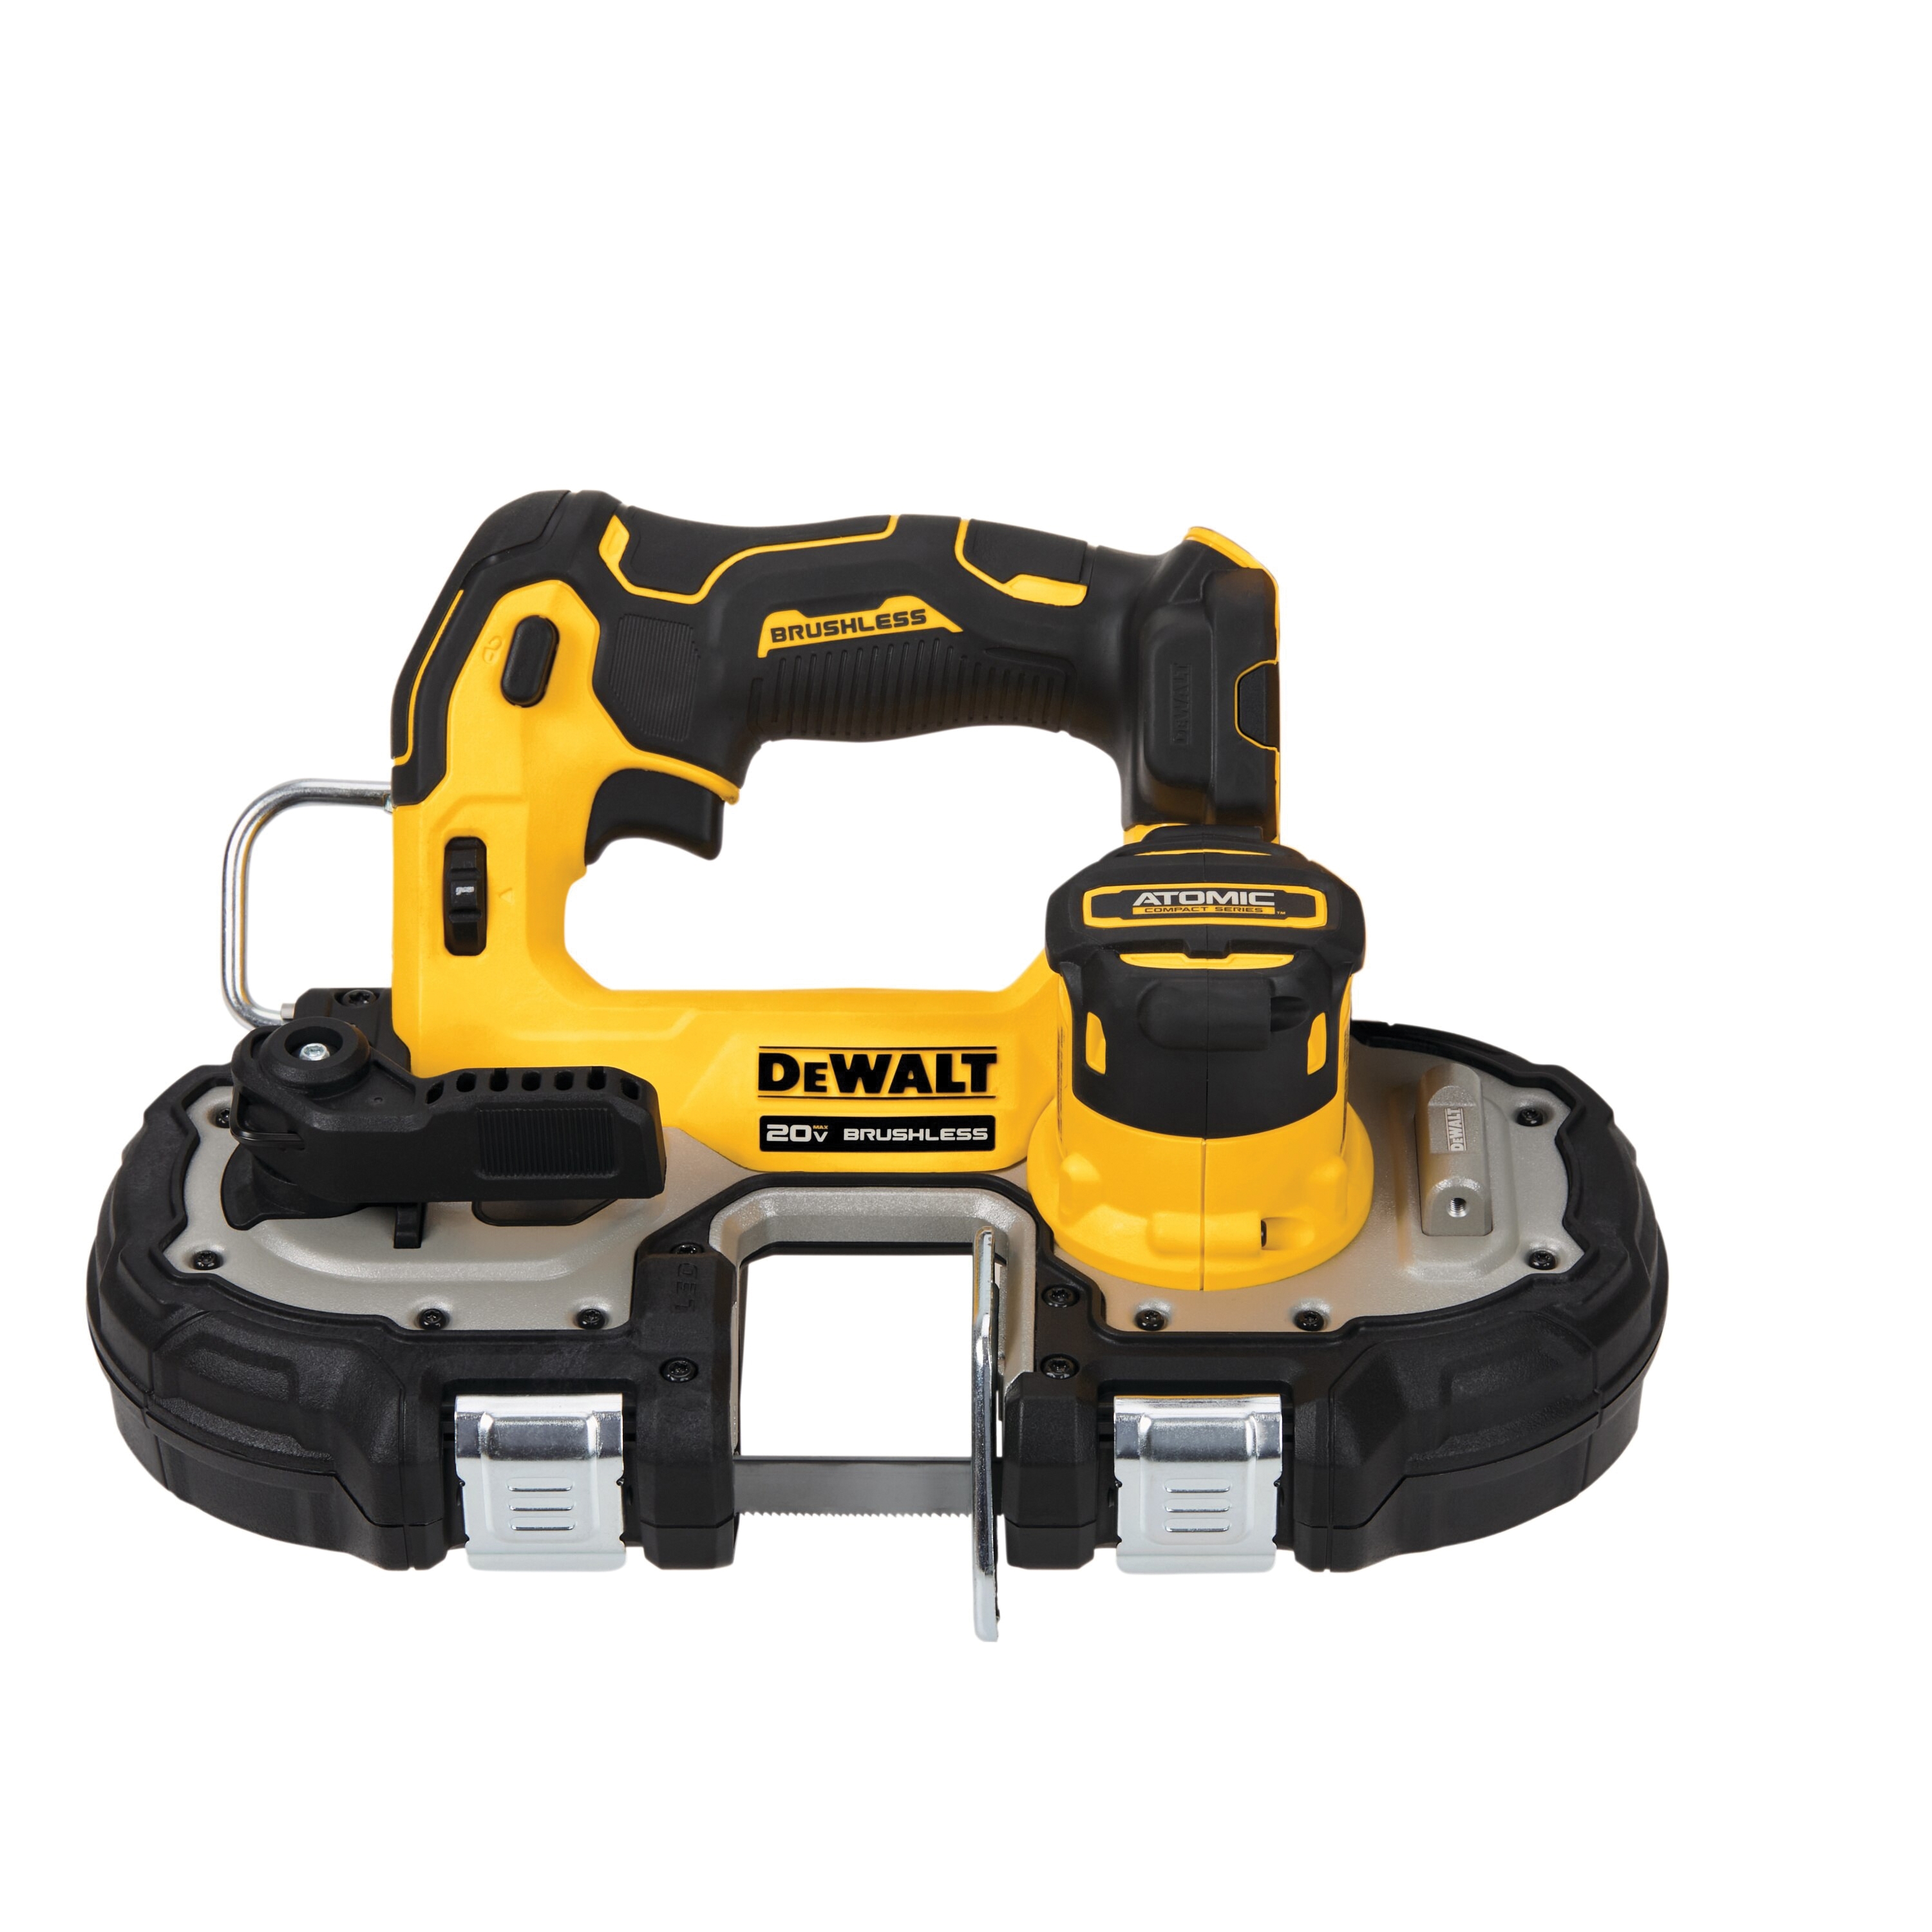 DeWALT ATOMIC DCS377B Compact Bandsaw, Tool Only, 20 V Battery, 4 Ah, 27 in L Blade, 1-3/4 in Cutting Capacity - 1